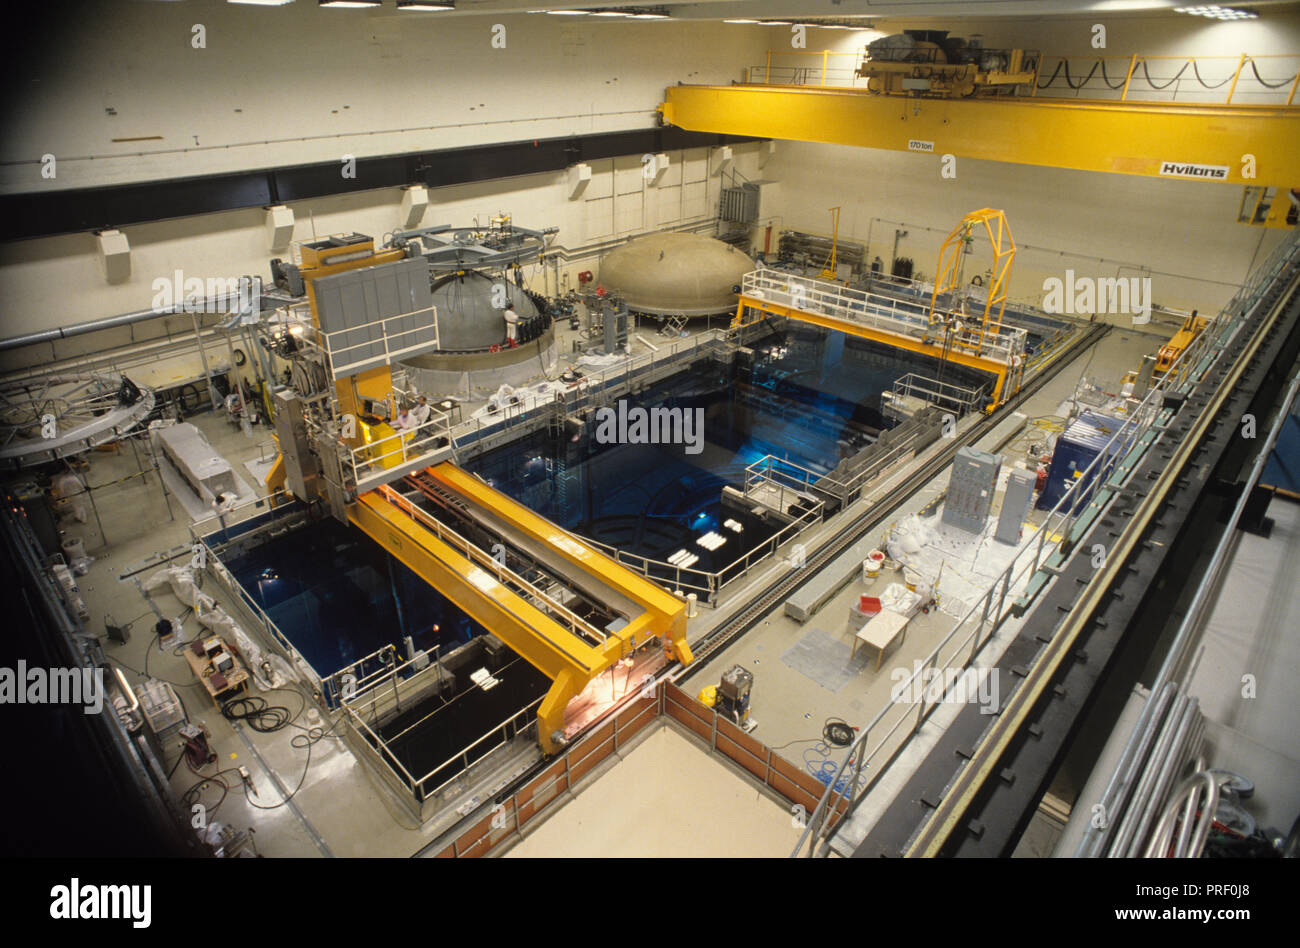 The nuclear reactor at Forsmark with the lid off during re-loading. Forsmark is located on the coast of Uppland about 100 miles north of Stockholm, Sweden Stock Photo